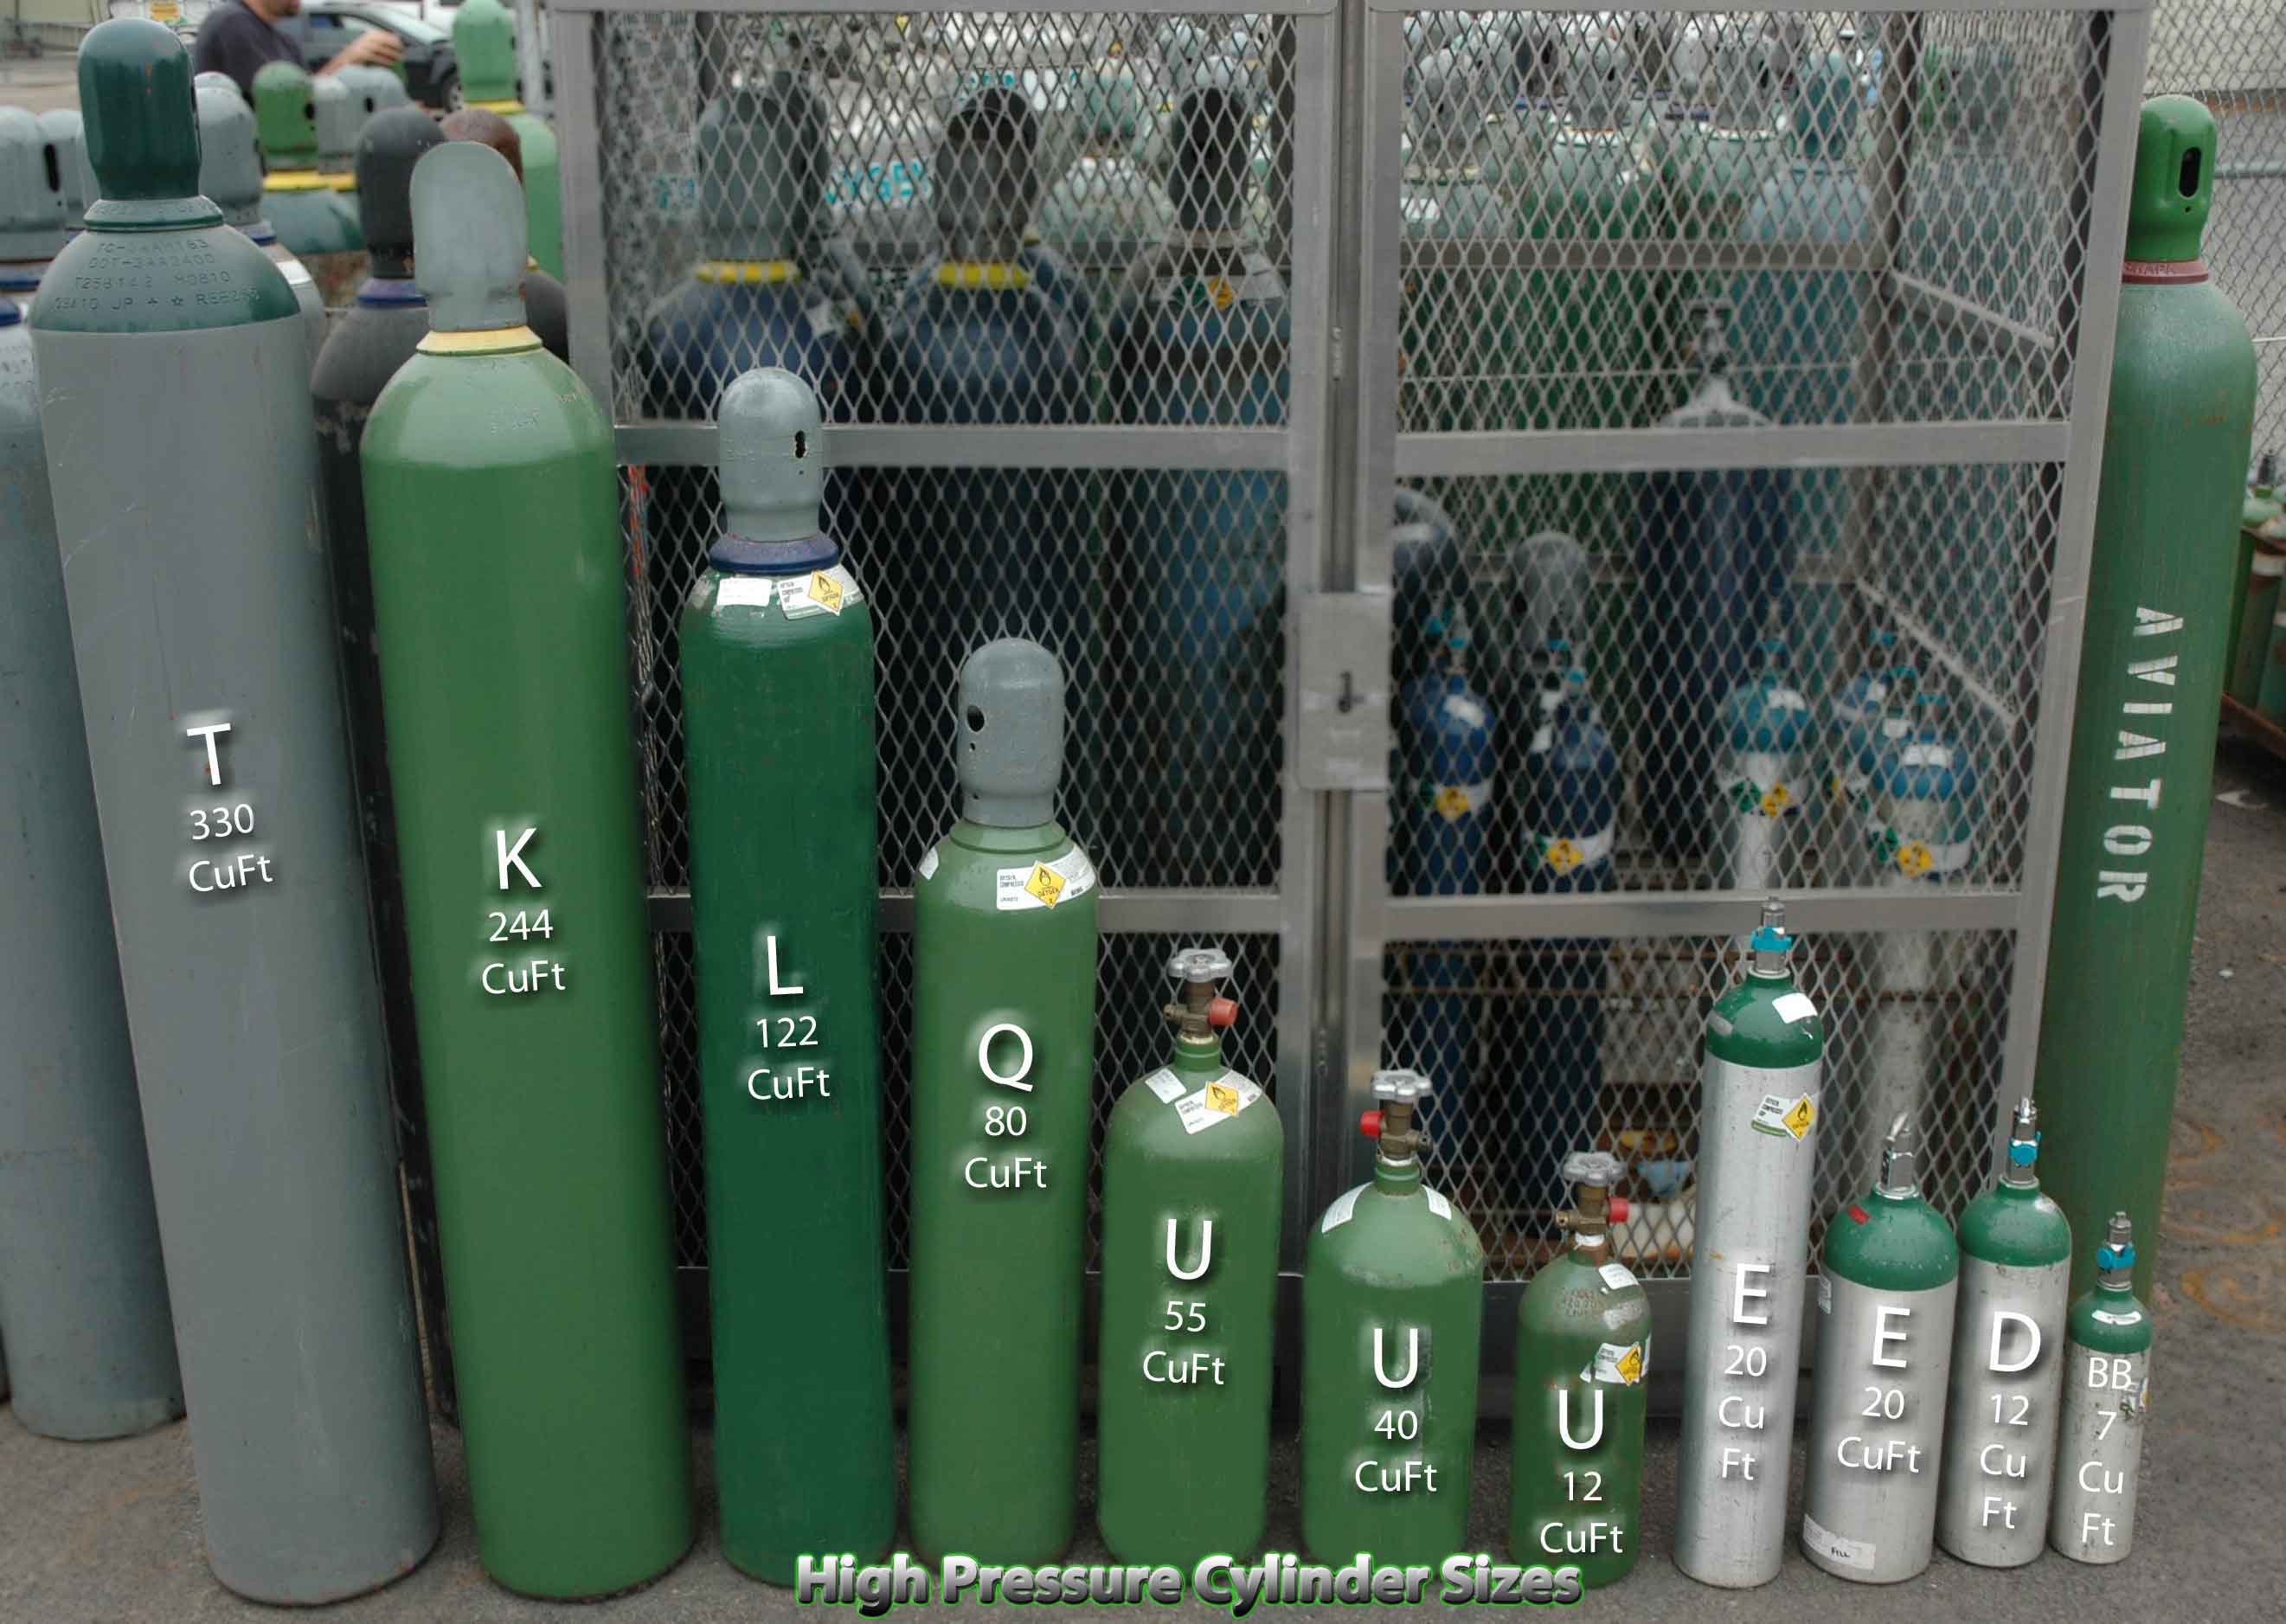 Where can you get oxygen tanks filled?